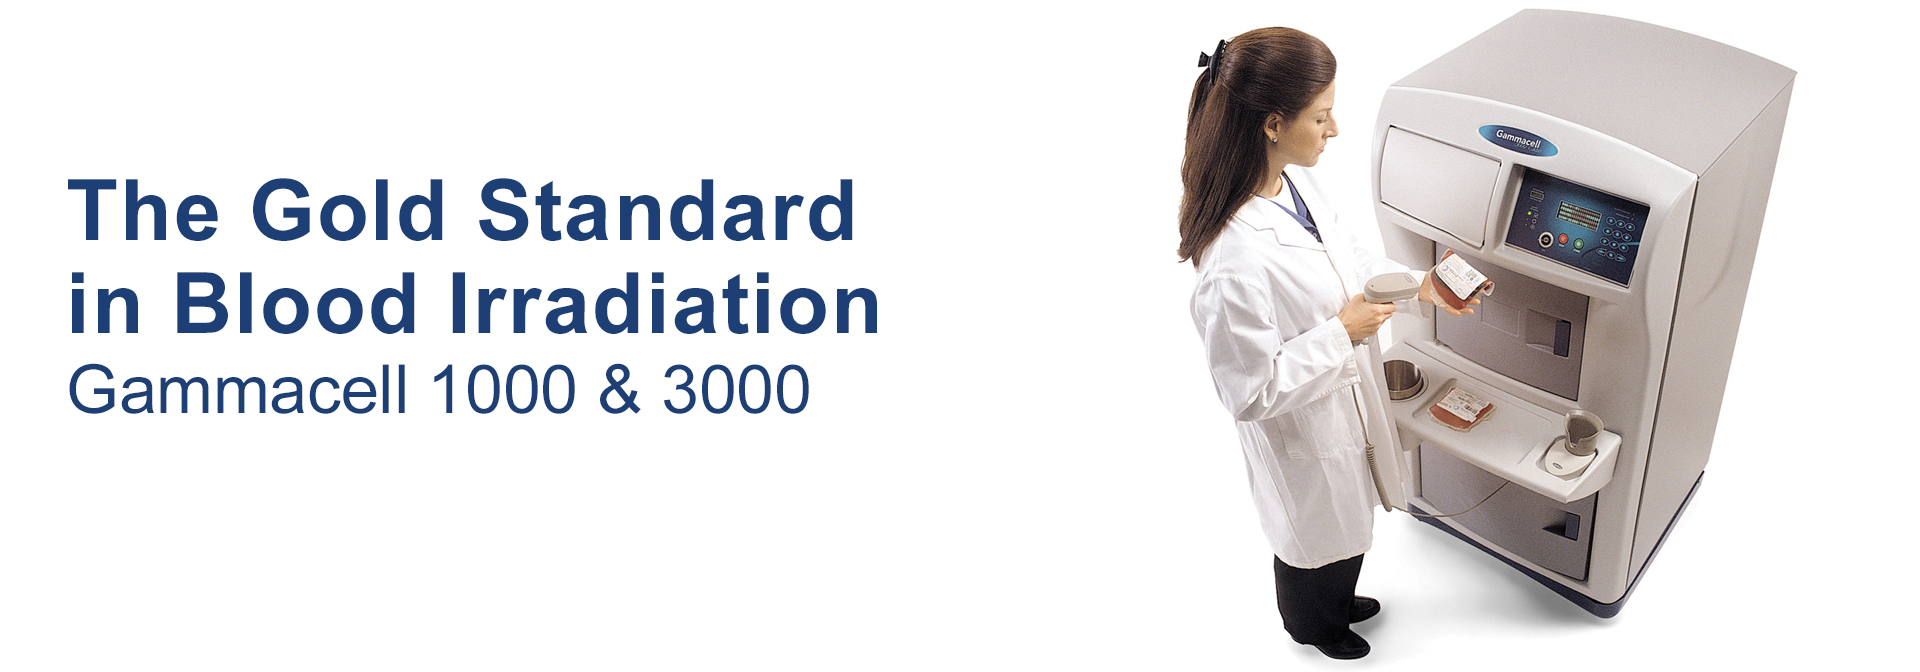 Gold Standard in Blood Irradiation: Gammacell 1000 & 3000